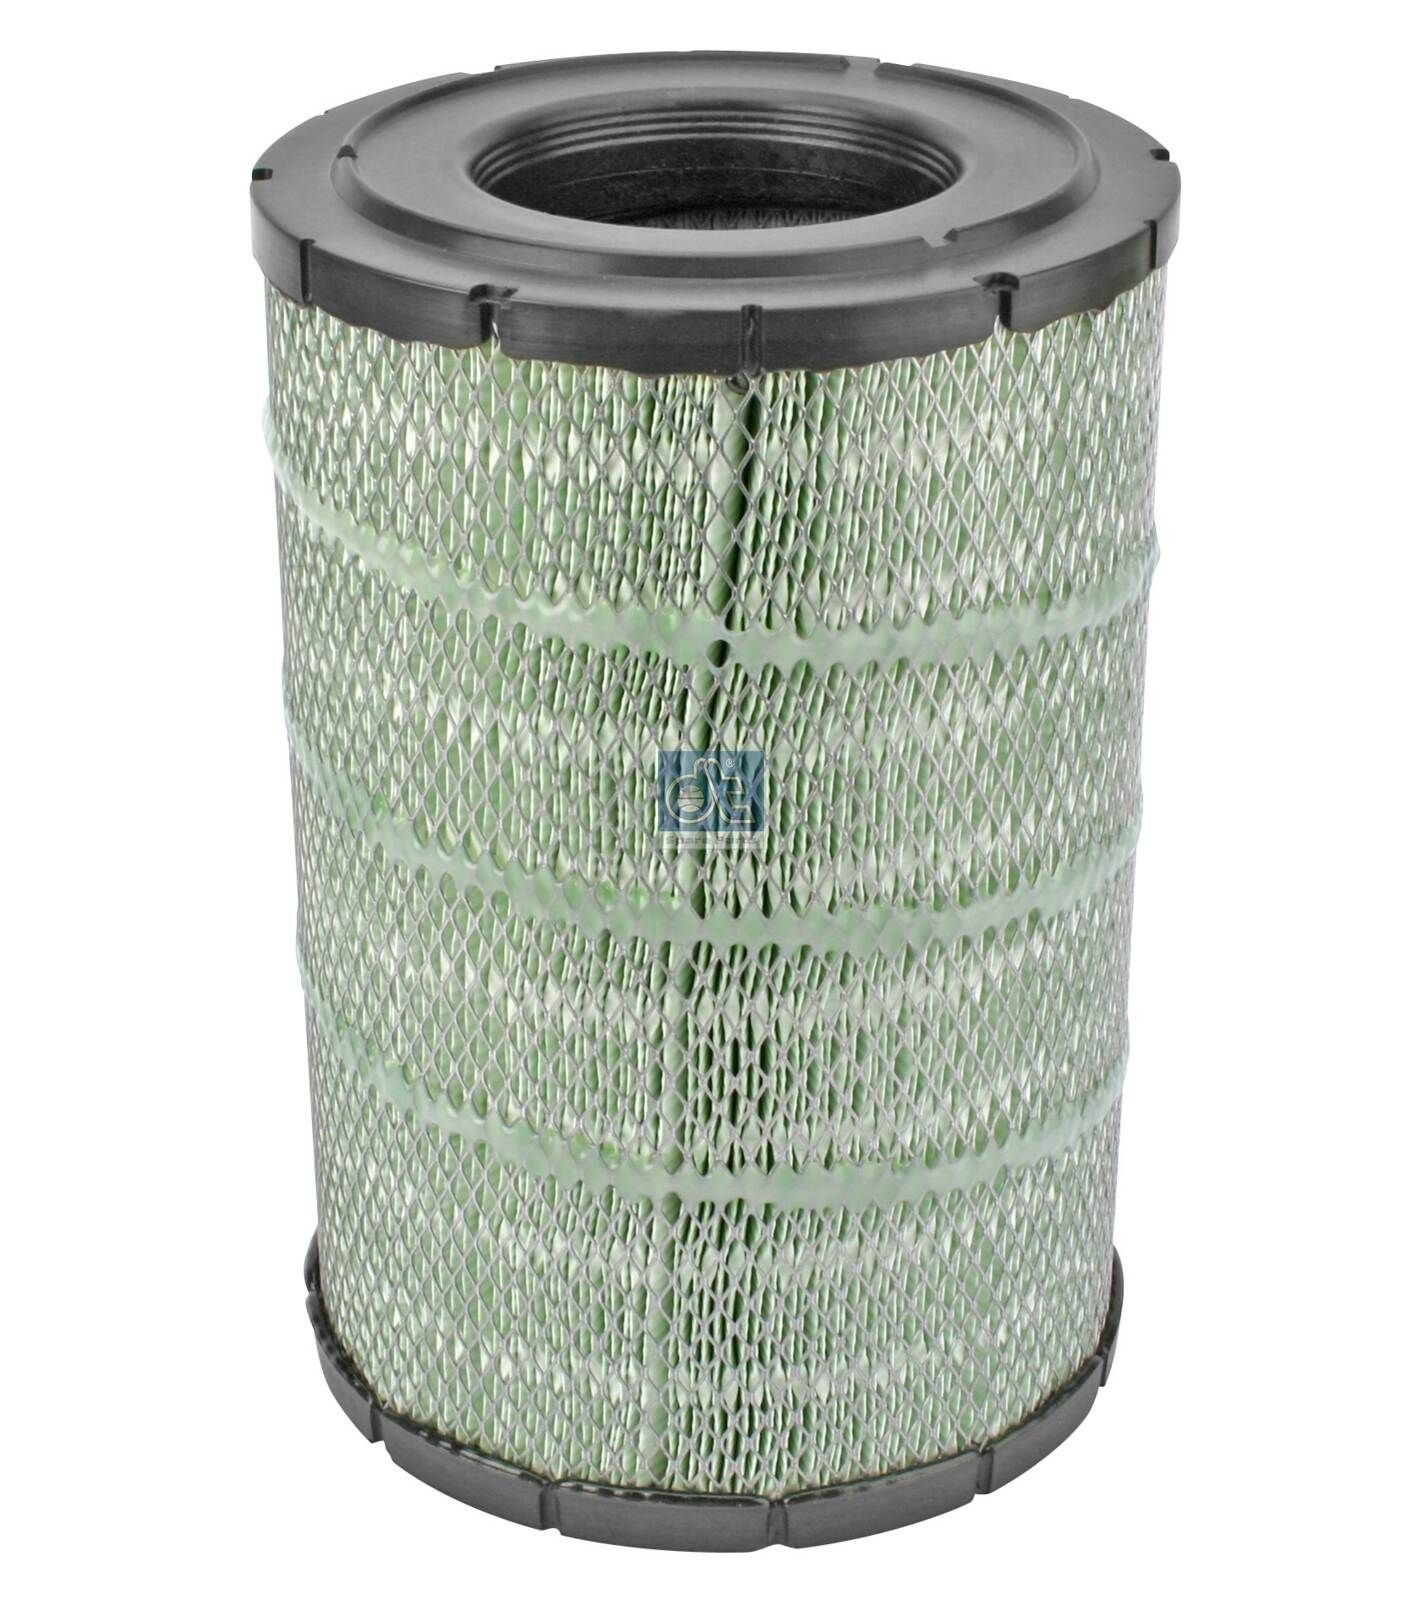 C 25 003 DT Spare Parts 374mm, 245mm, Filter Insert Height: 374mm Engine air filter 6.25018 buy